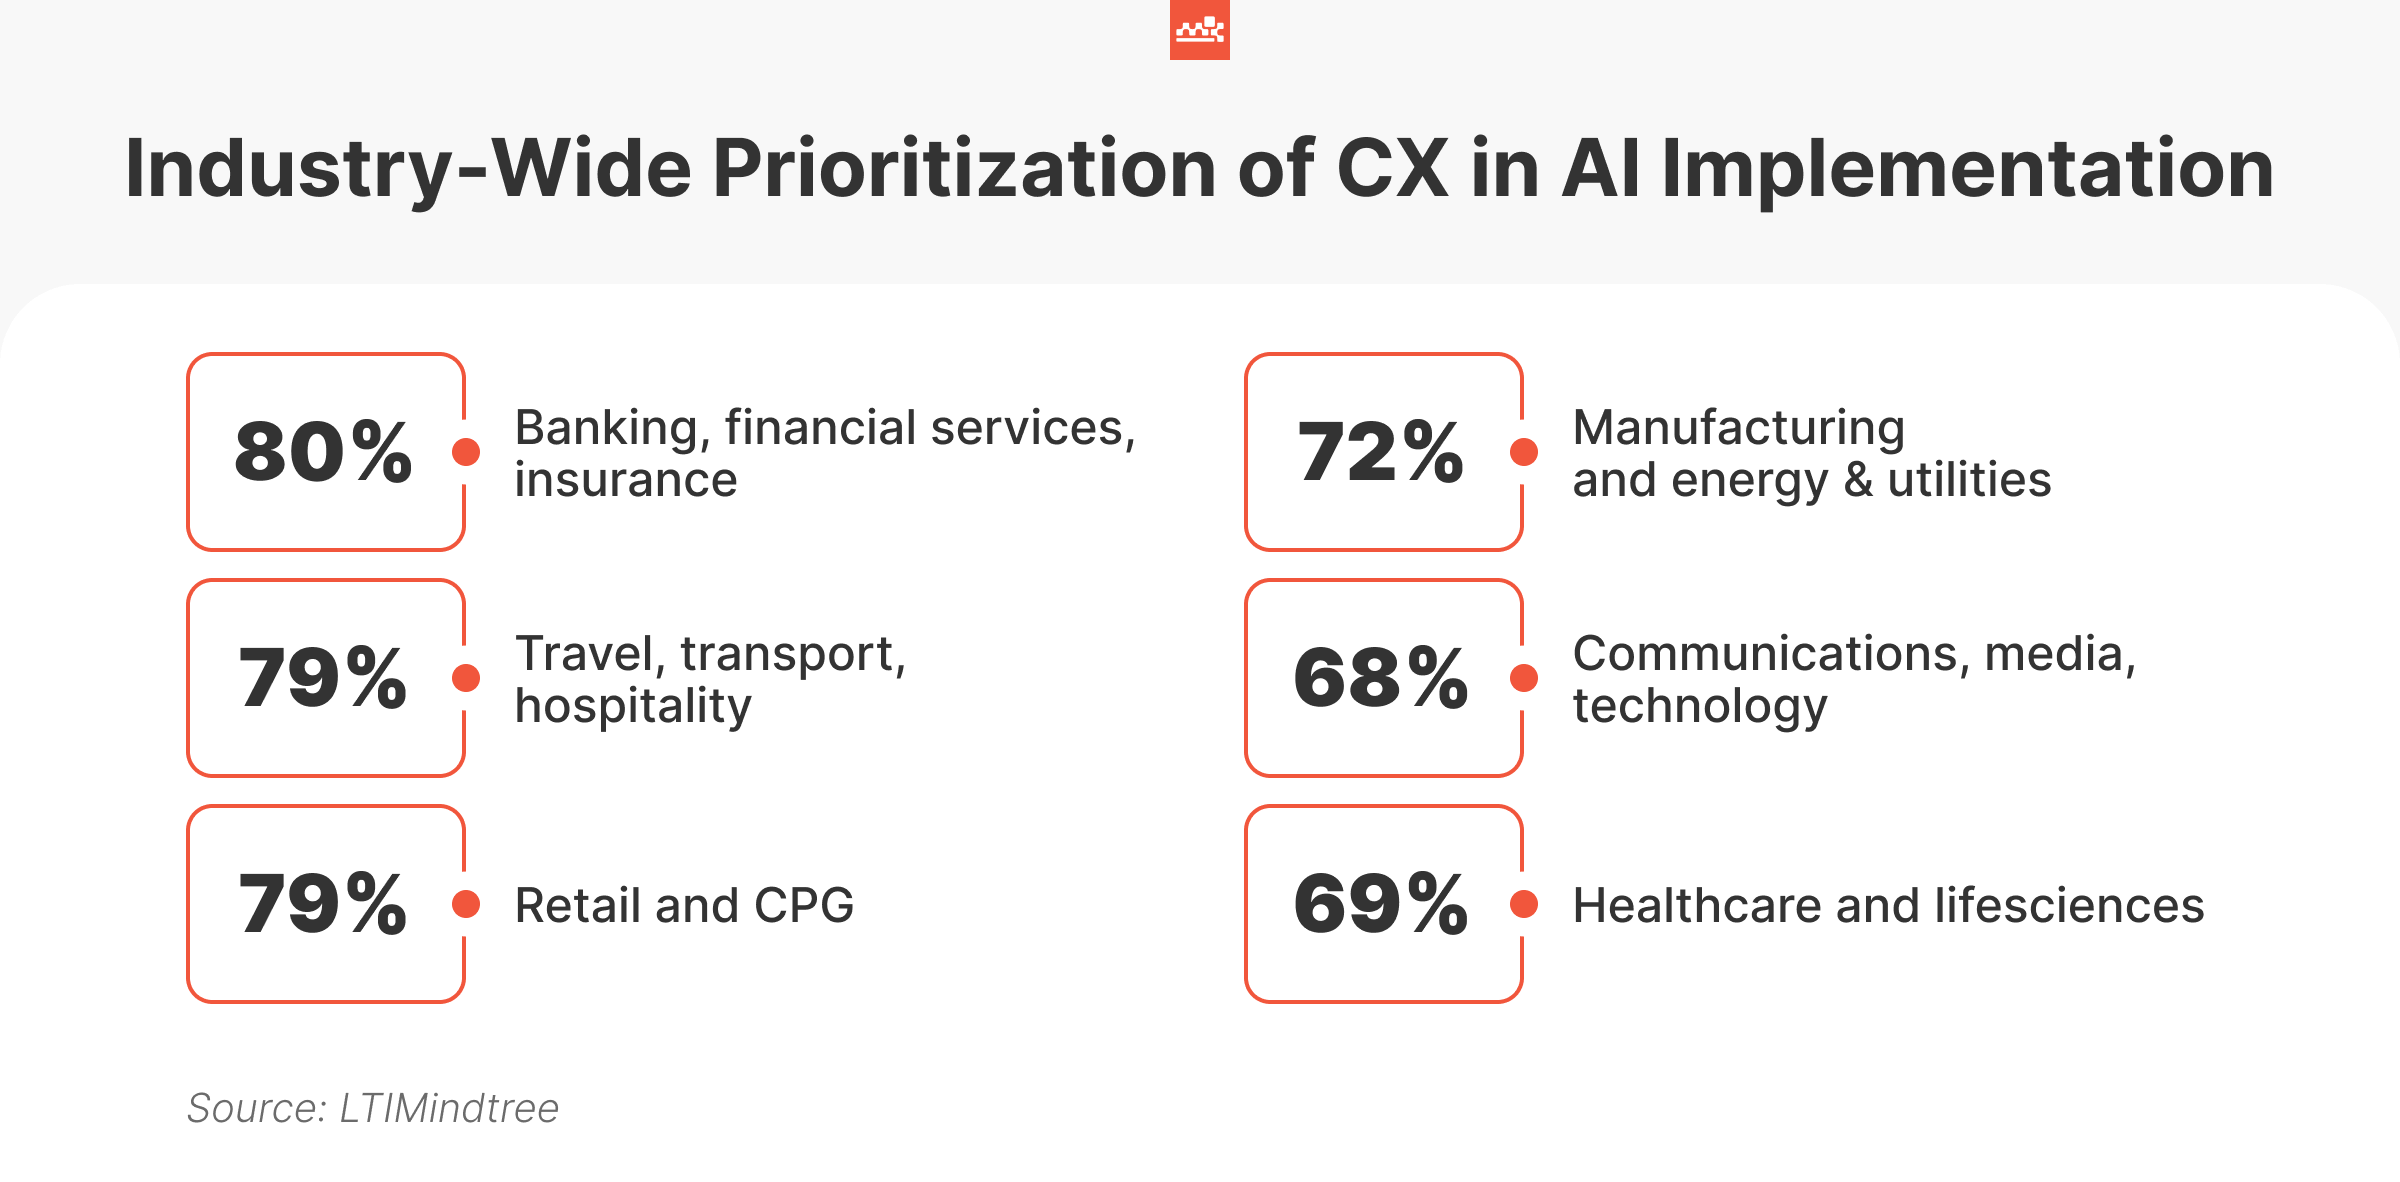 CX Priority in AI Implementation per Industry